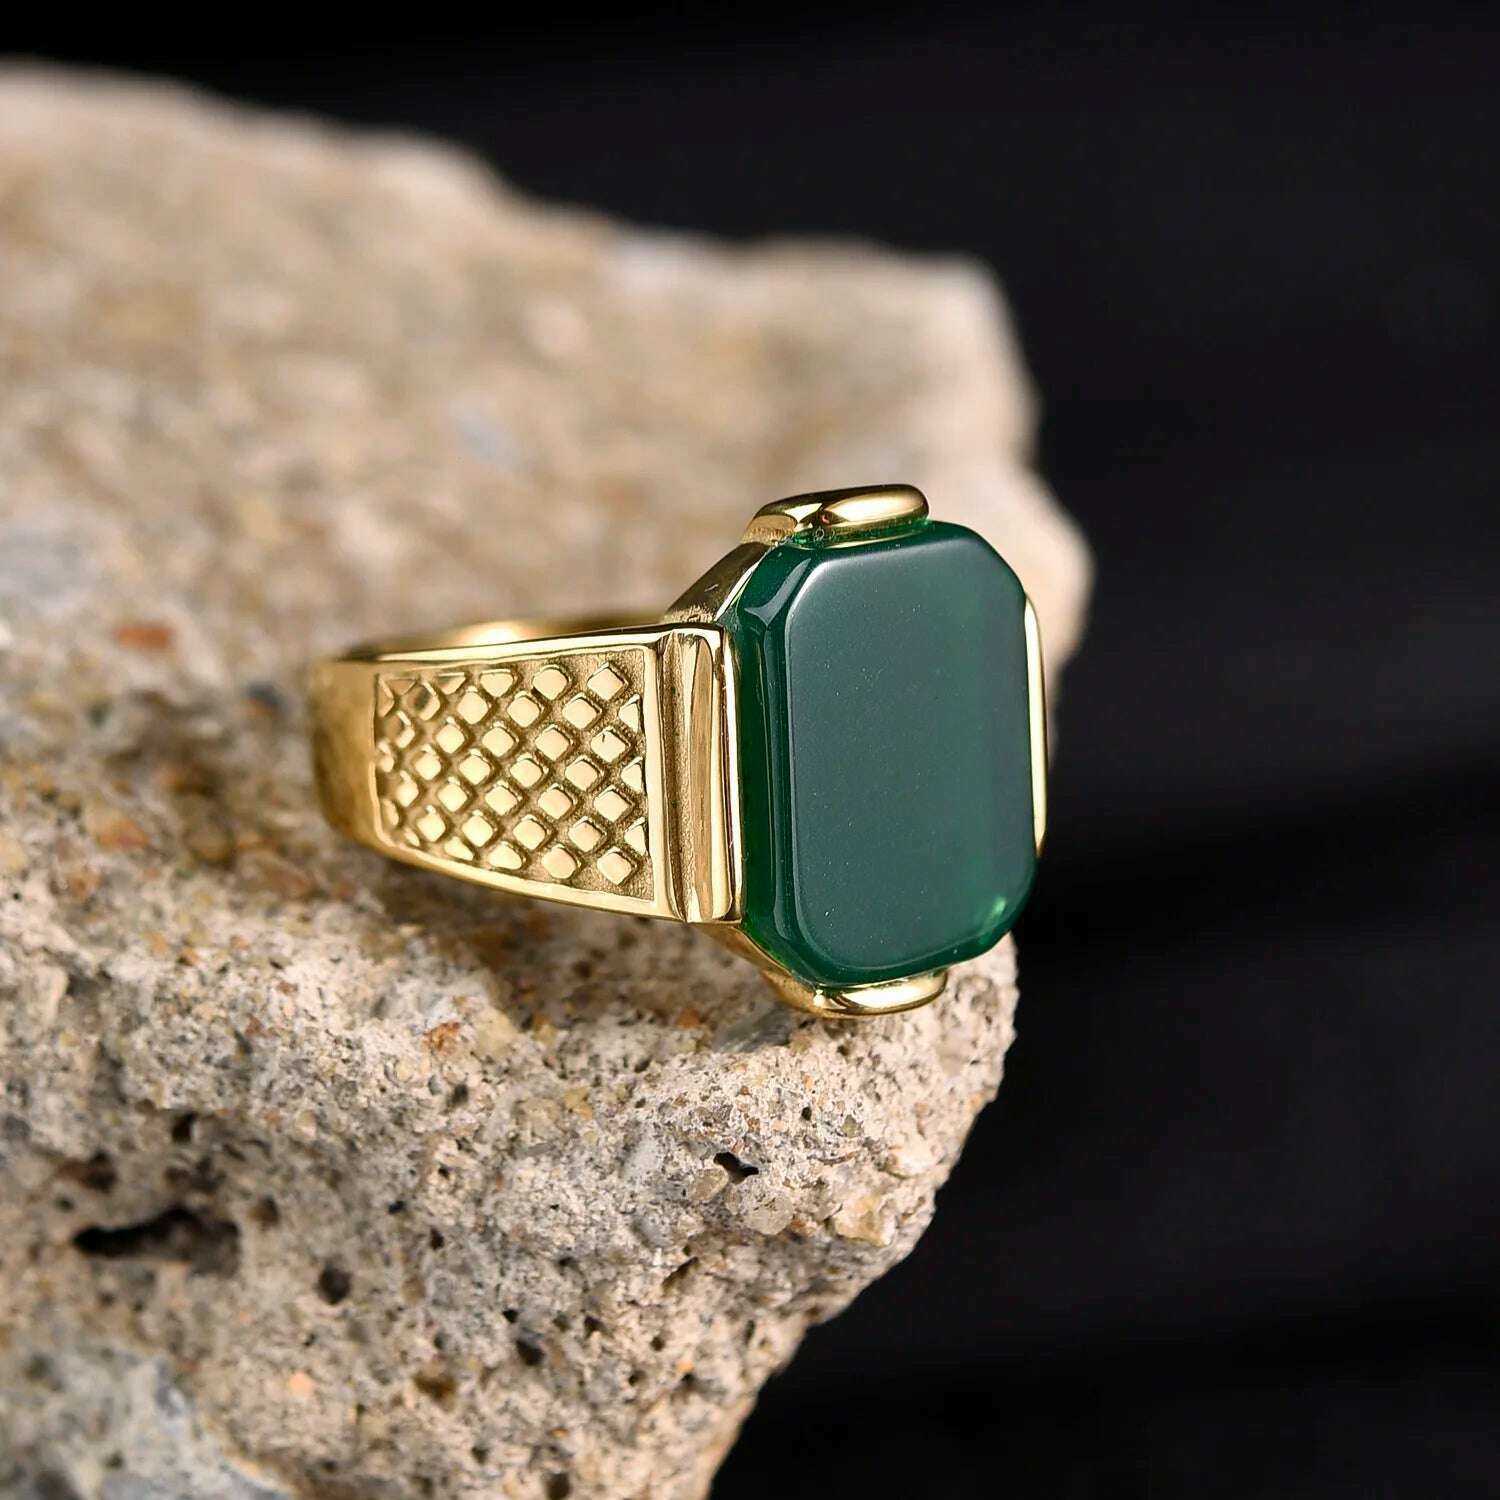 Men's High Quality Vintage Stainless Steel Gemstone Styles 18K Gold Plated Ring Jewelry Professional Factory Made, Green Onyx / 8, KIMLUD Women's Clothes